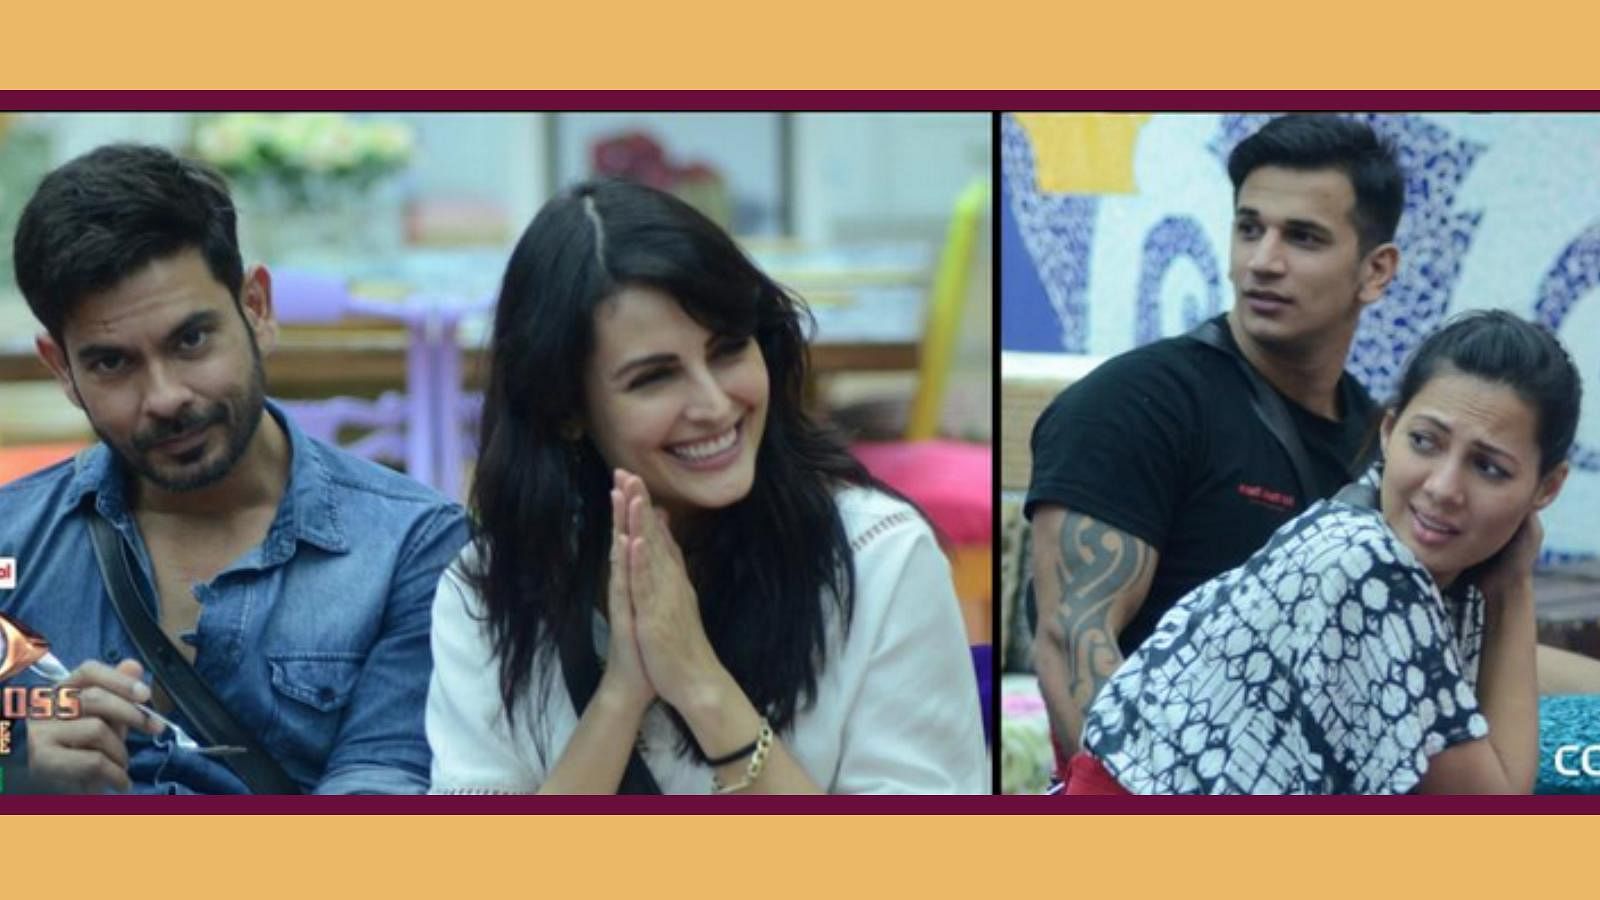 <i>Bigg Boss 9</i> contestants Mandana and Rochelle have a cat fight on day 4 of the show